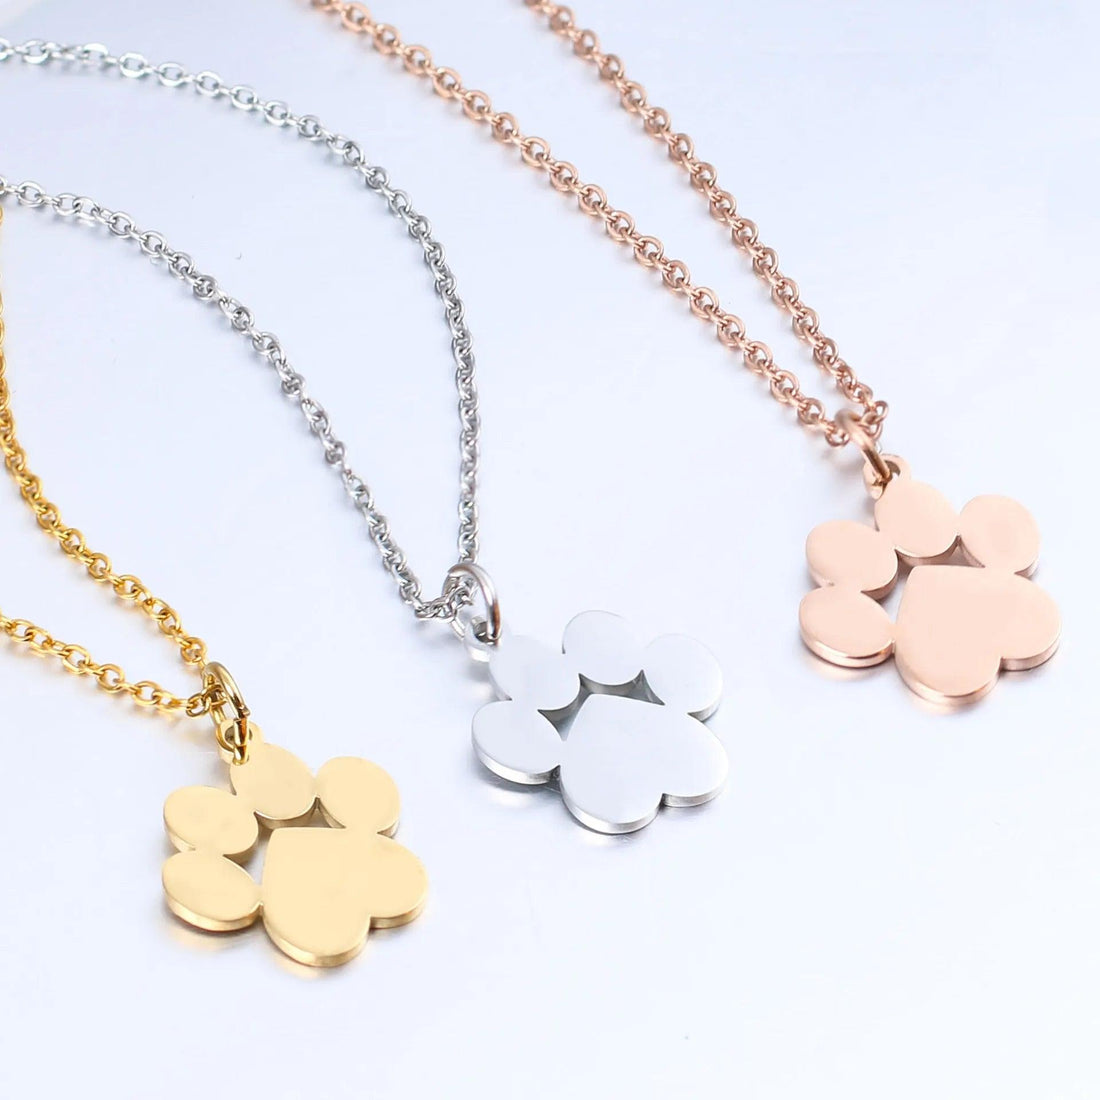 Stainless Steel Paw Pendant Necklace, Gold, Silver, Rose gold - Just Cats - Gifts for Cat Lovers